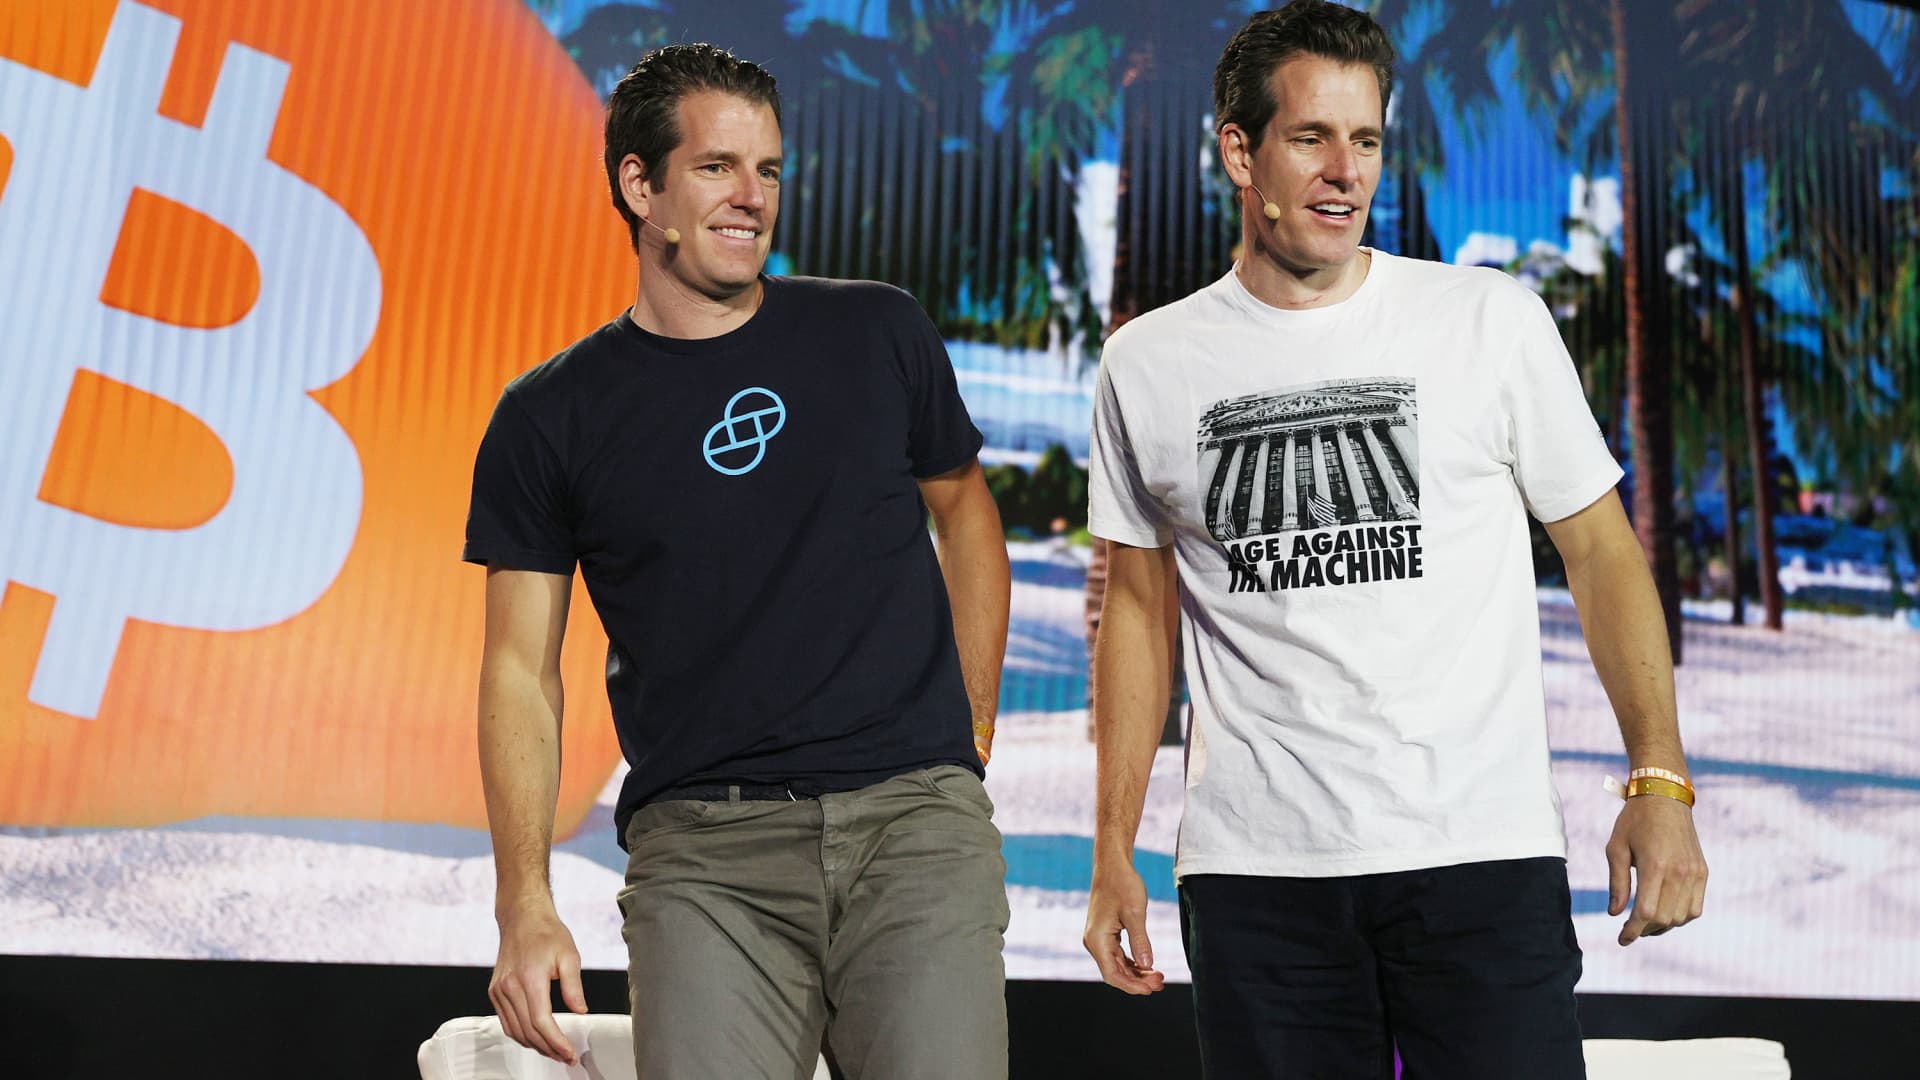 Tyler Winklevoss and Cameron Winklevoss (L-R), creators of crypto exchange Gemini Trust Co. on stage at the Bitcoin 2021 Convention, a crypto-currency conference held at the Mana Convention Center in Wynwood on June 04, 2021 in Miami, Florida.